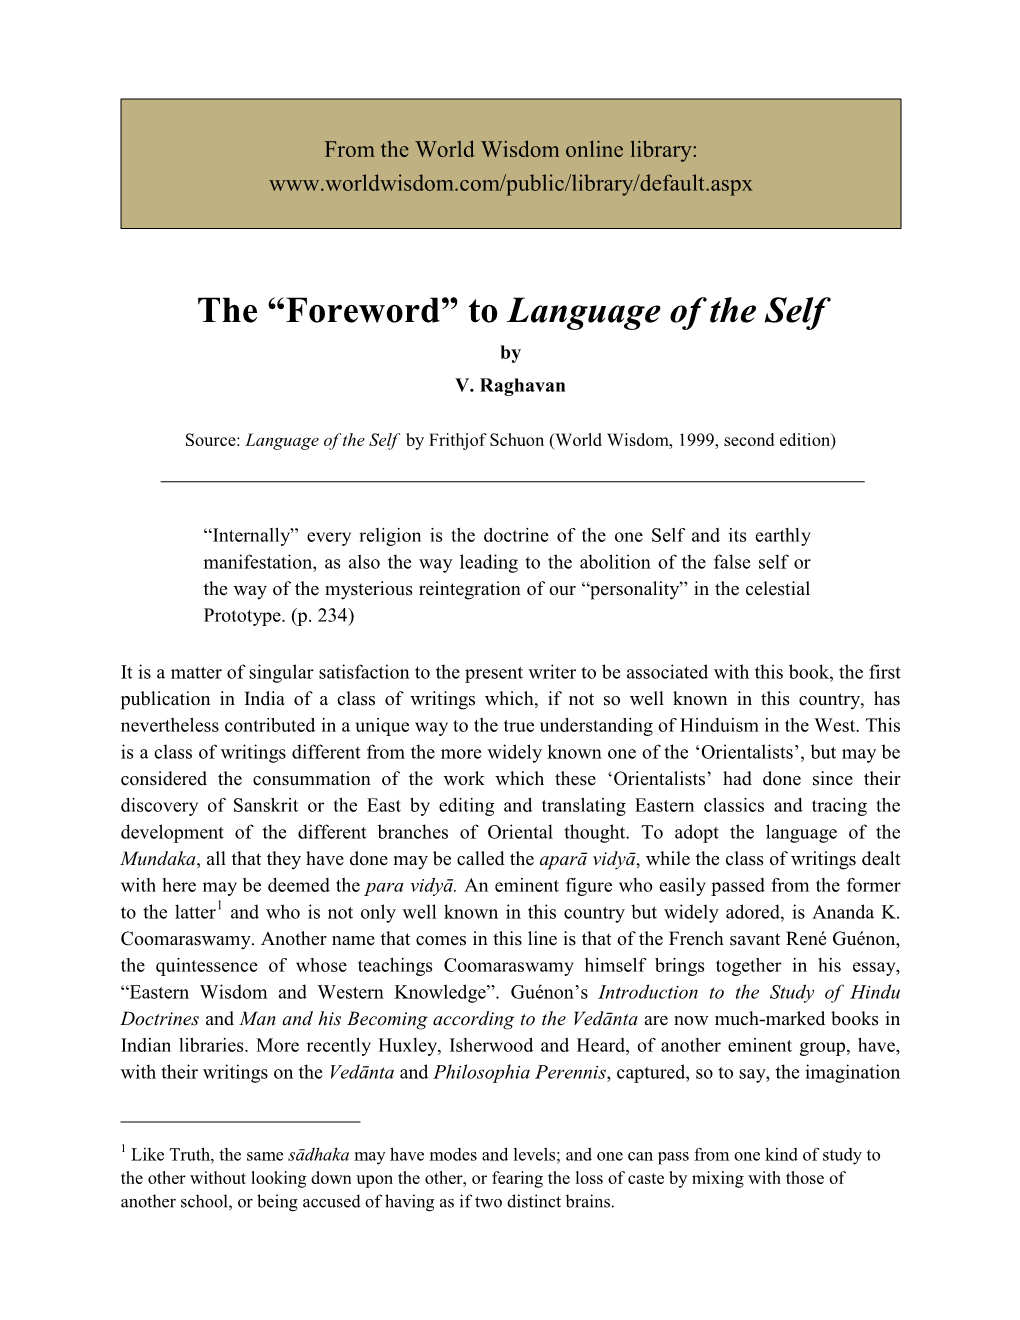 Foreword to "Language of the Self"